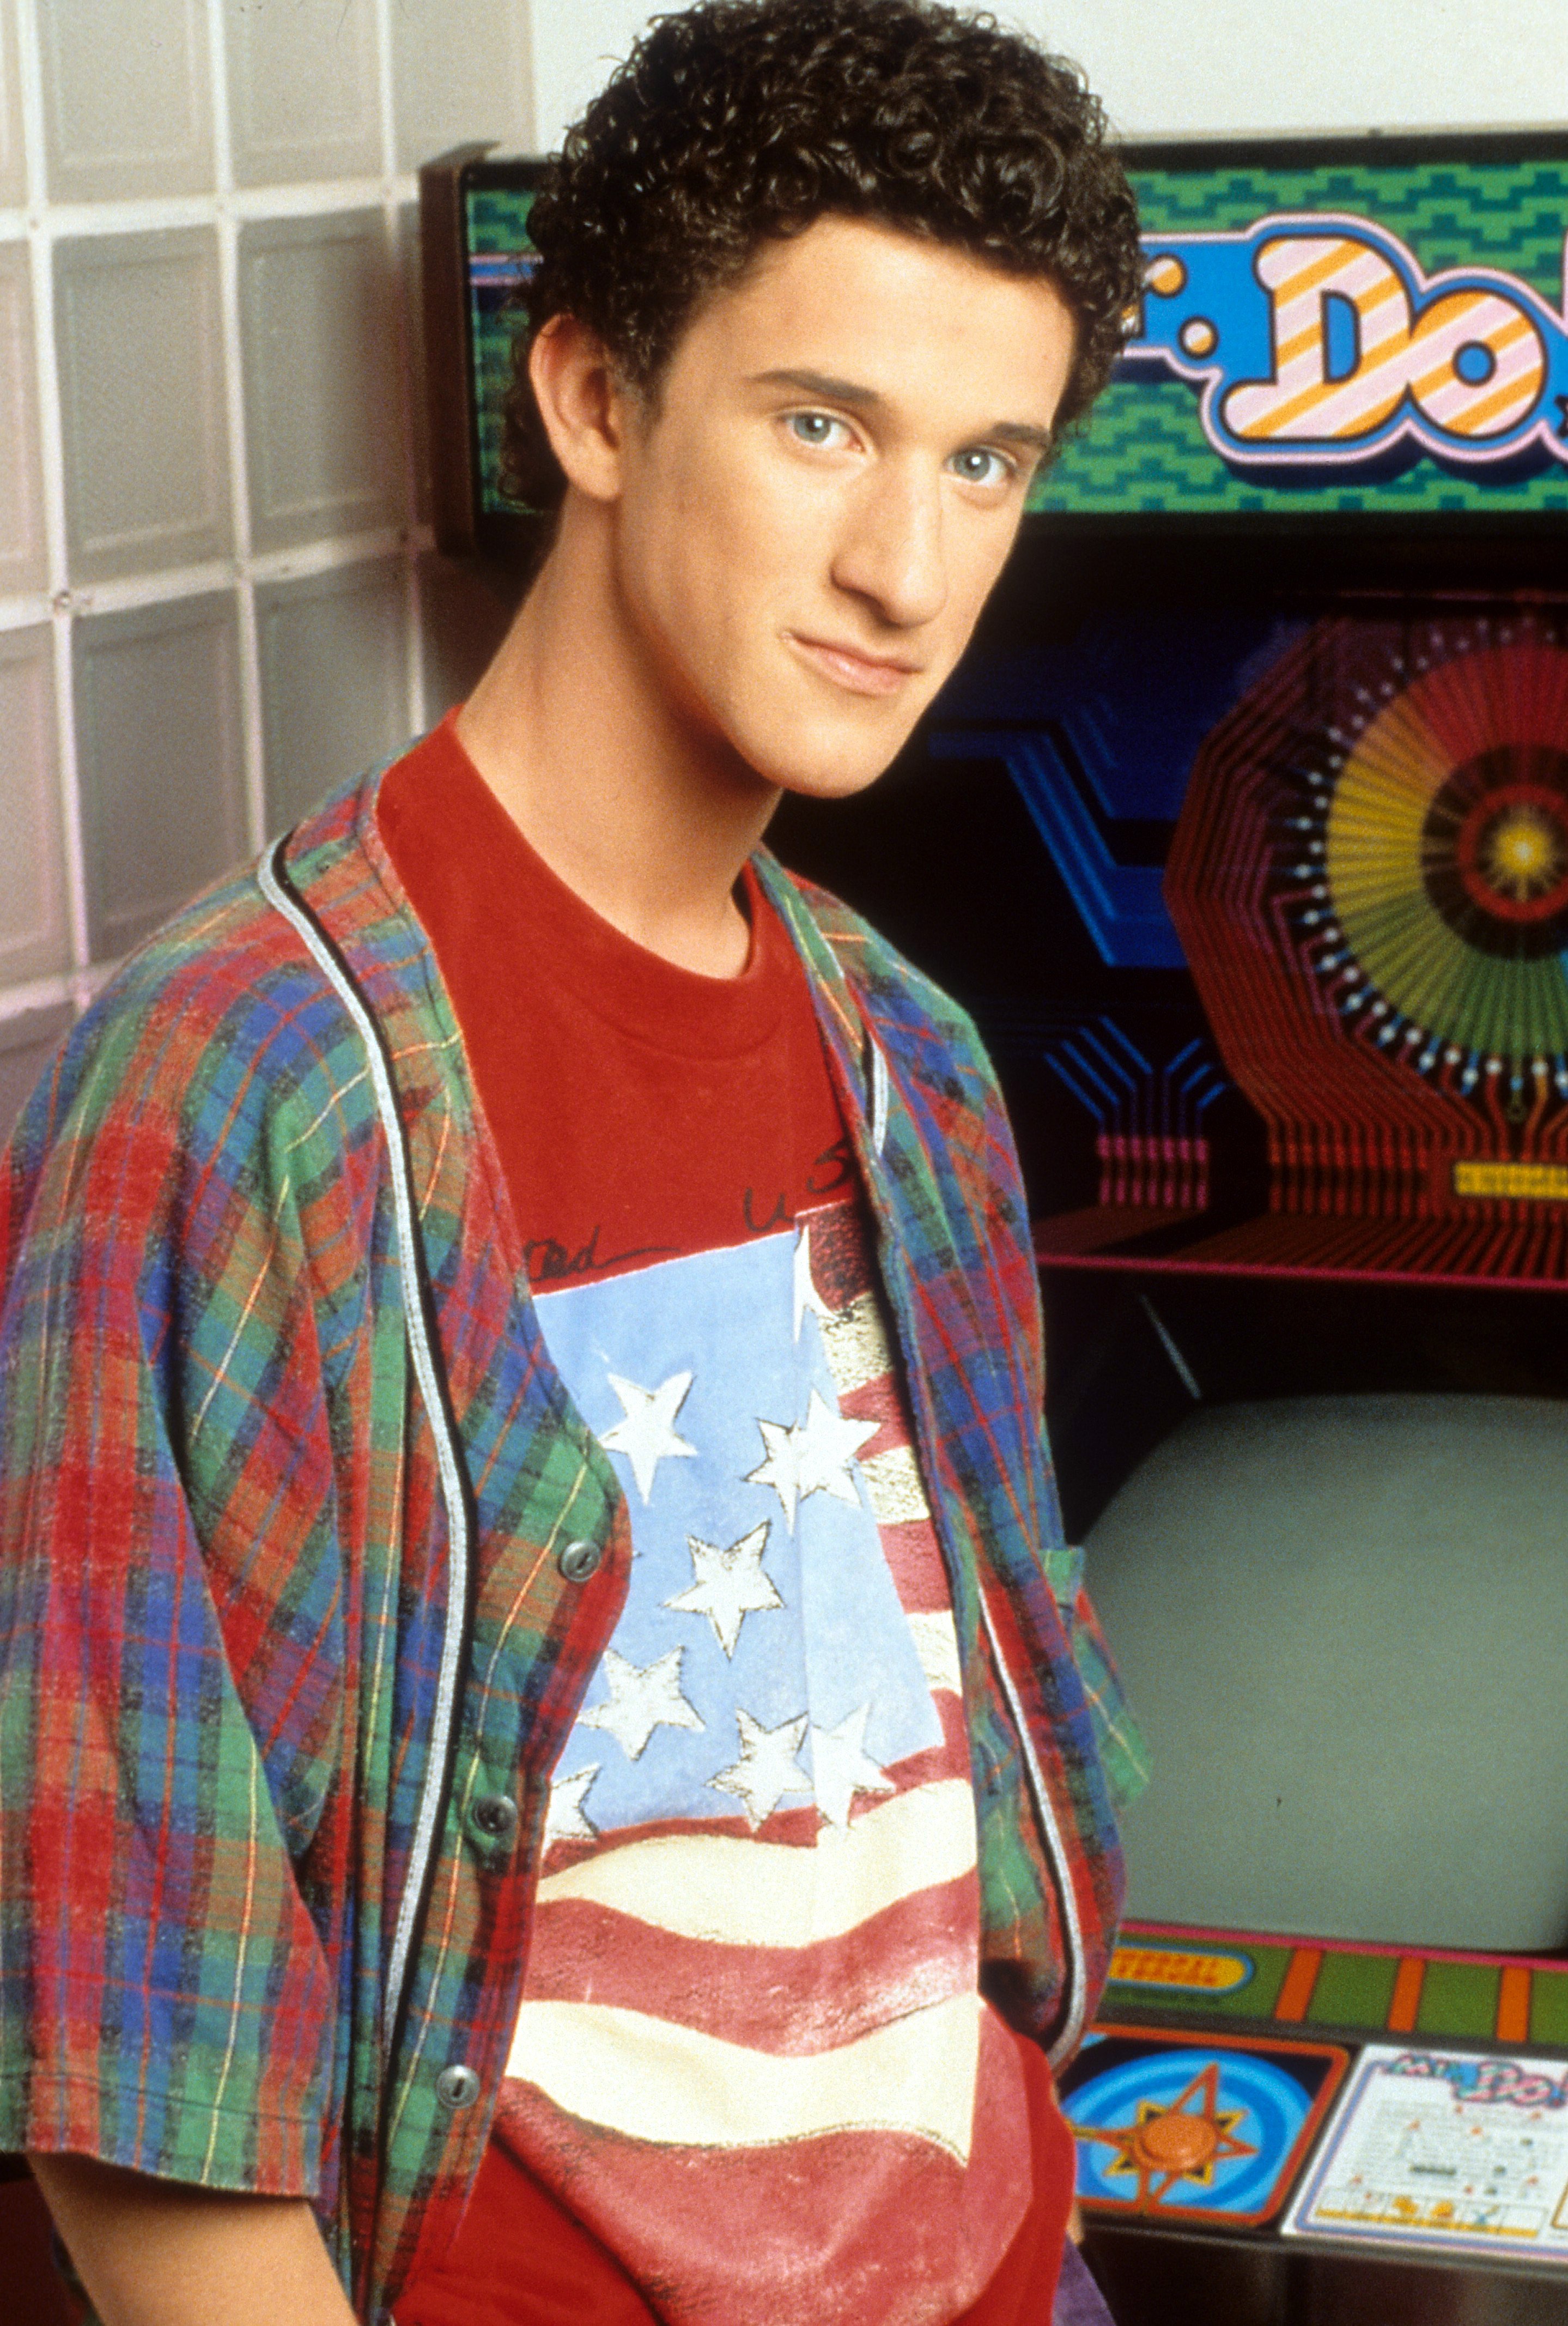 Dustin Diamond in publicity portrait for the television series 'Saved By The Bell', Circa 1991. | Source: Getty Images